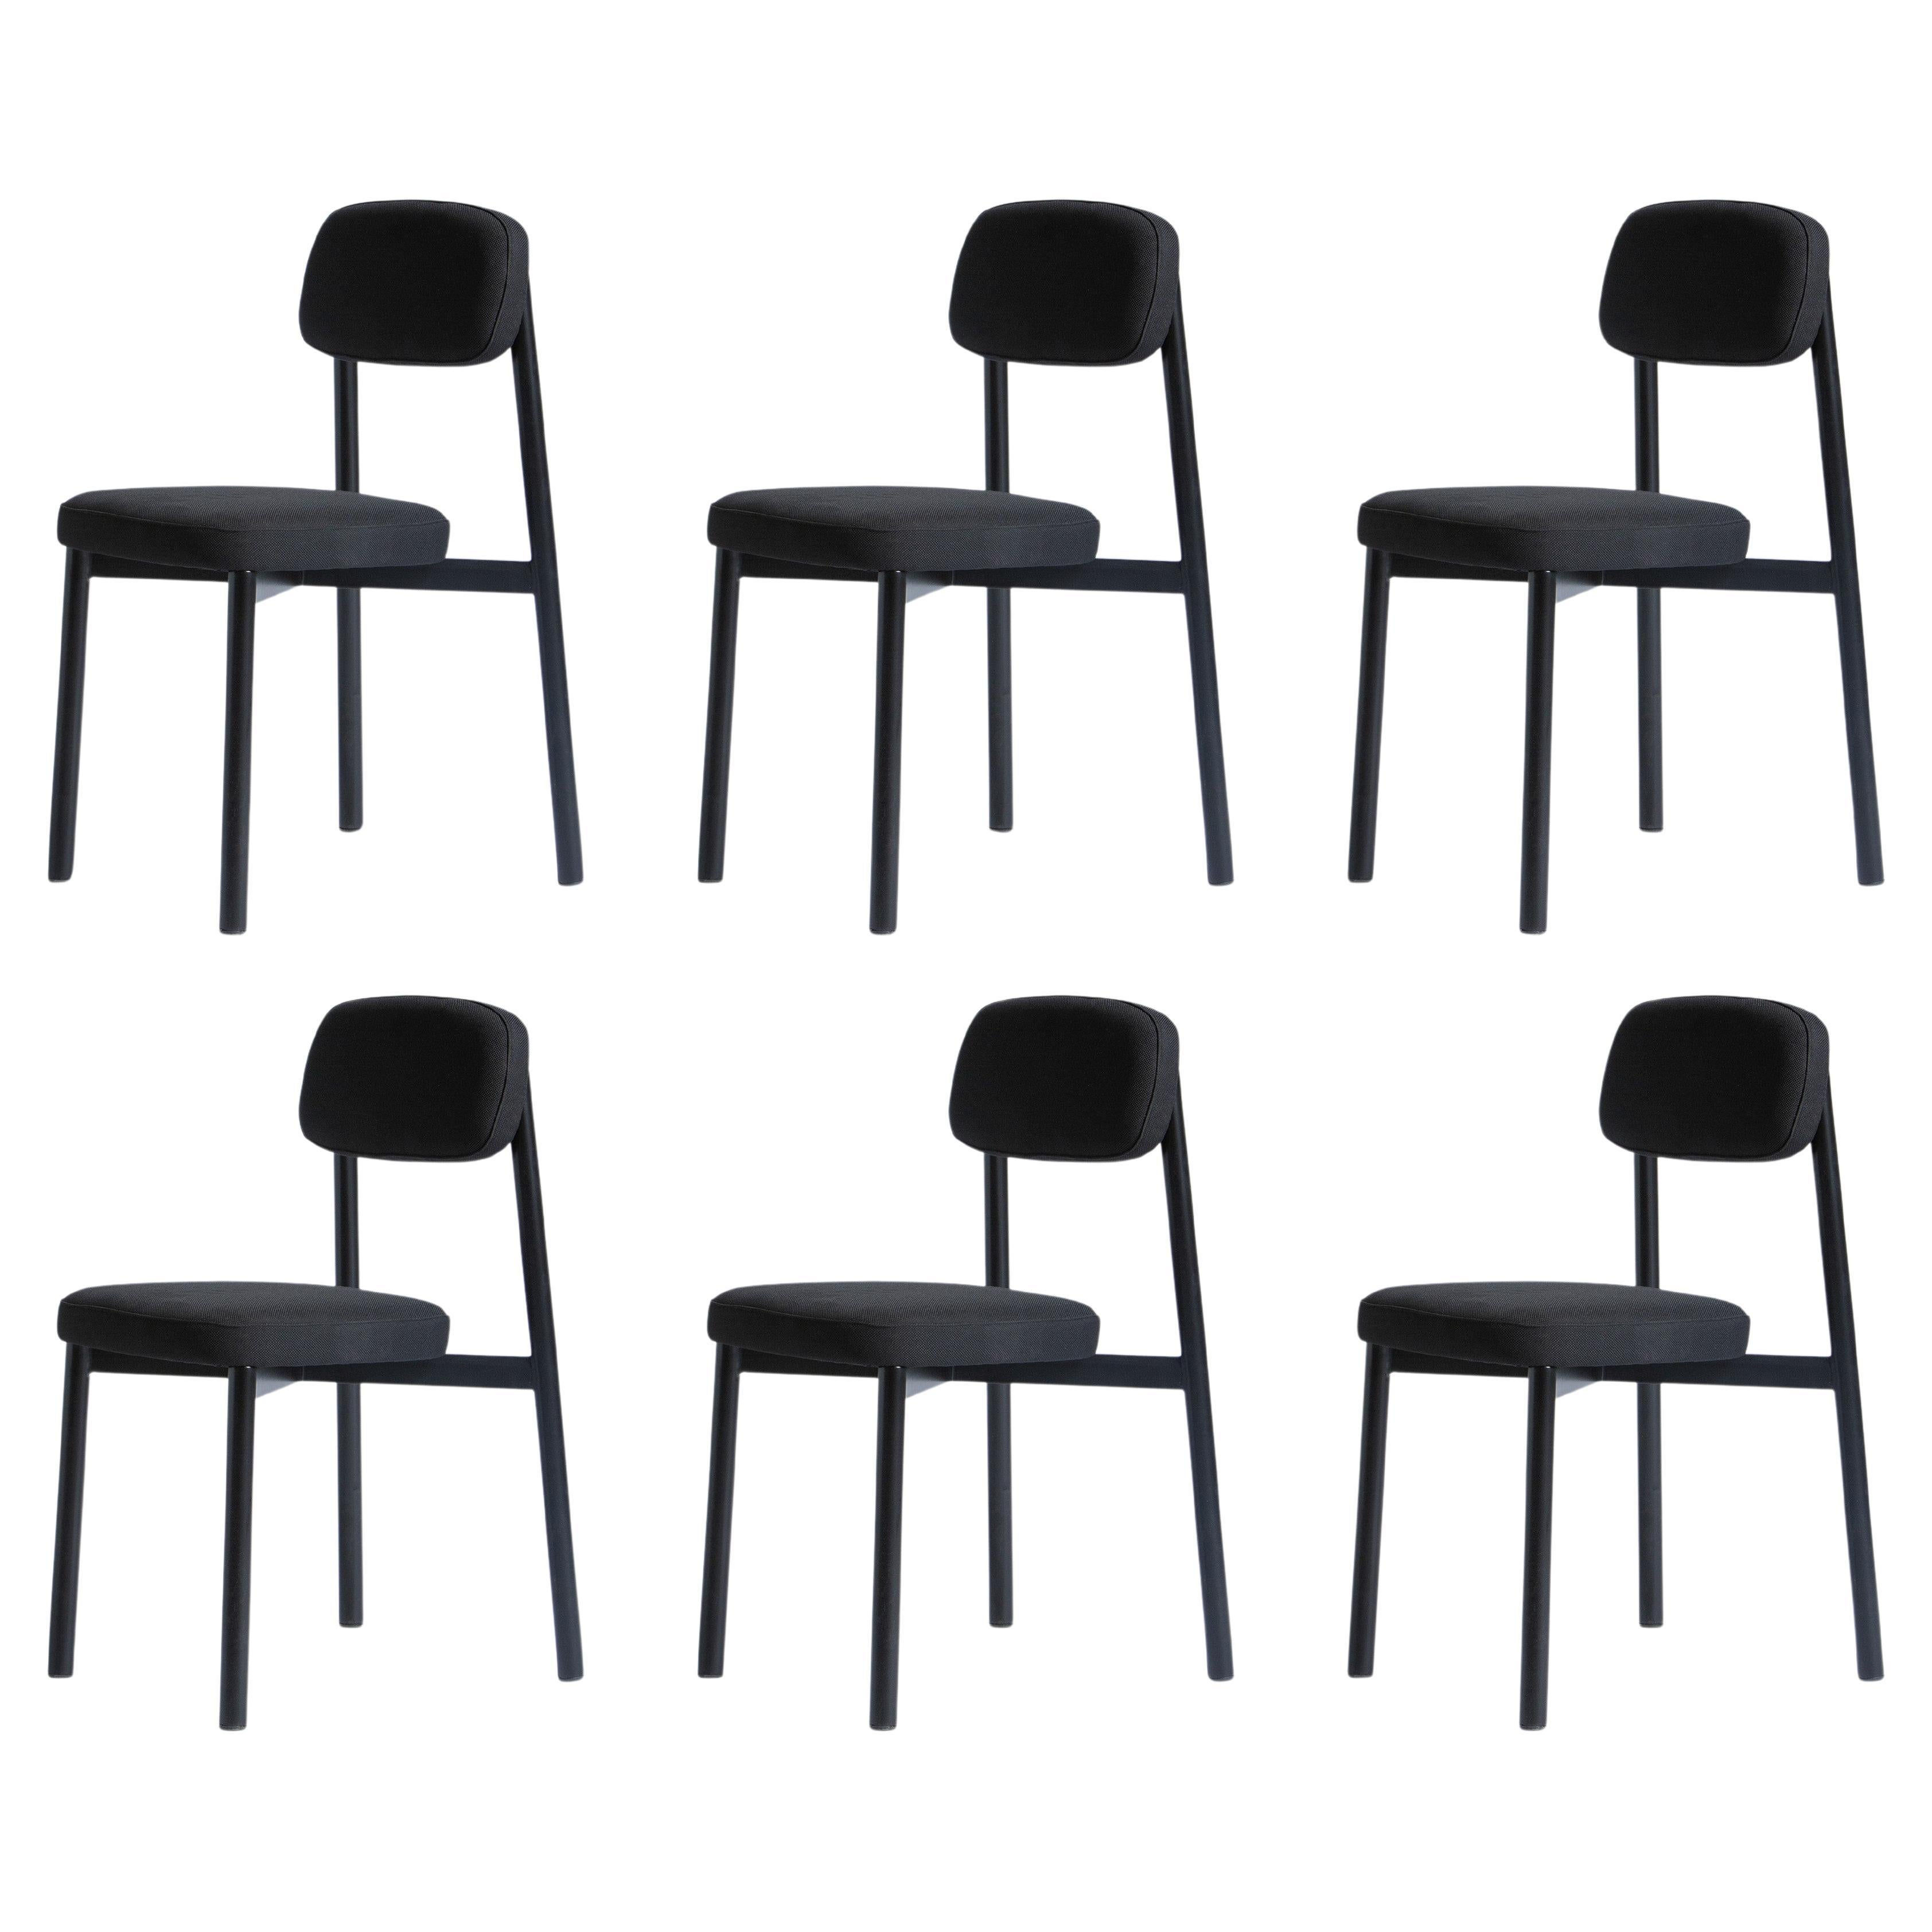 Set of 6 Black Residence Chairs by Kann Design